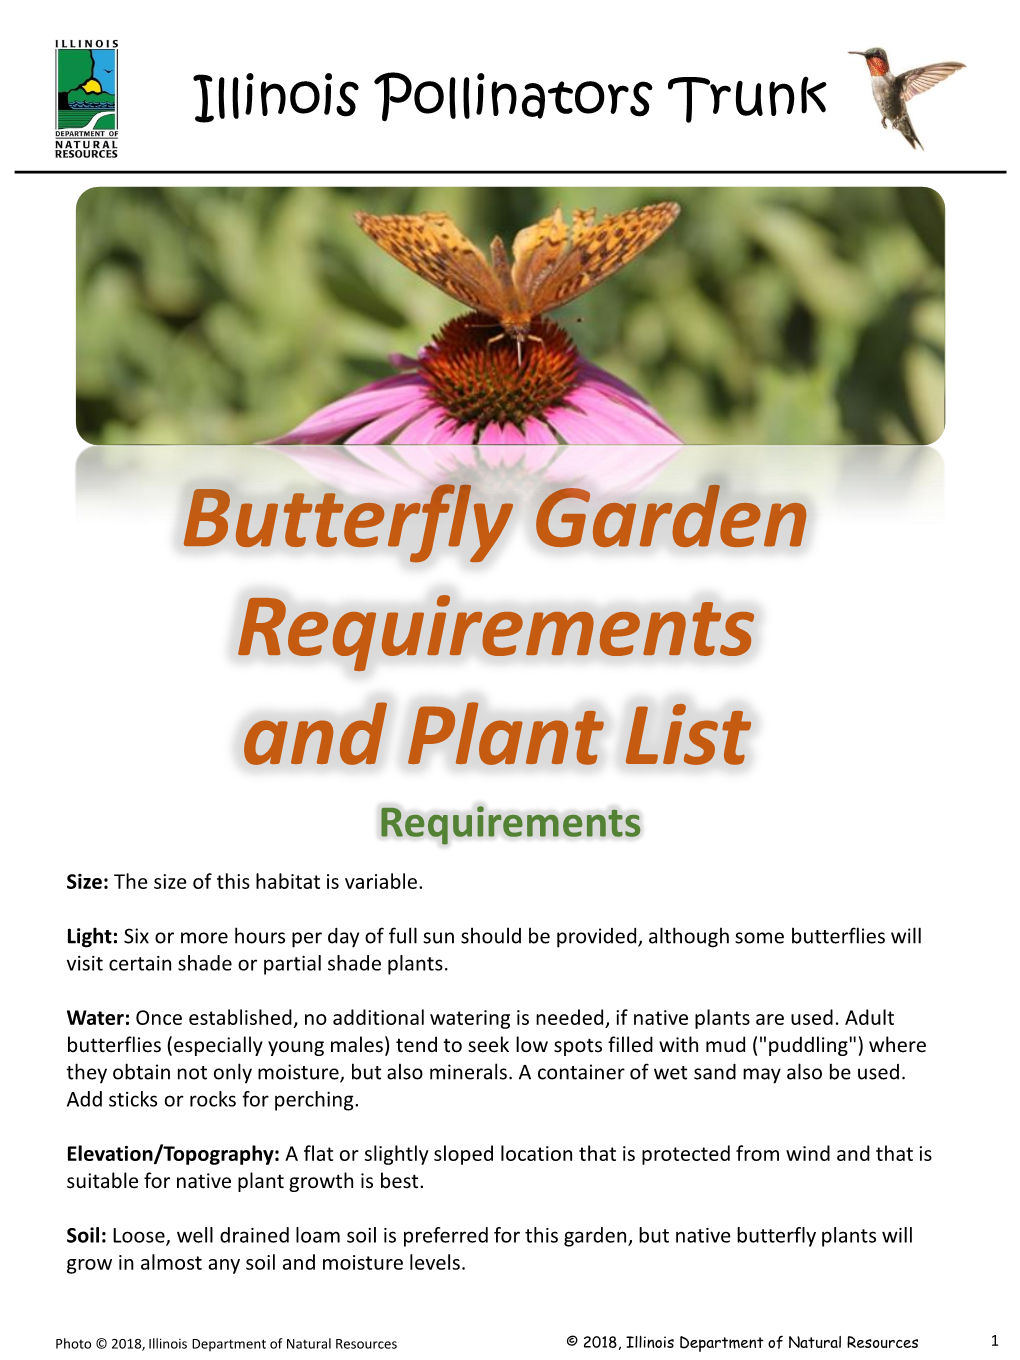 Butterfly Garden Requirements and Plant List Document